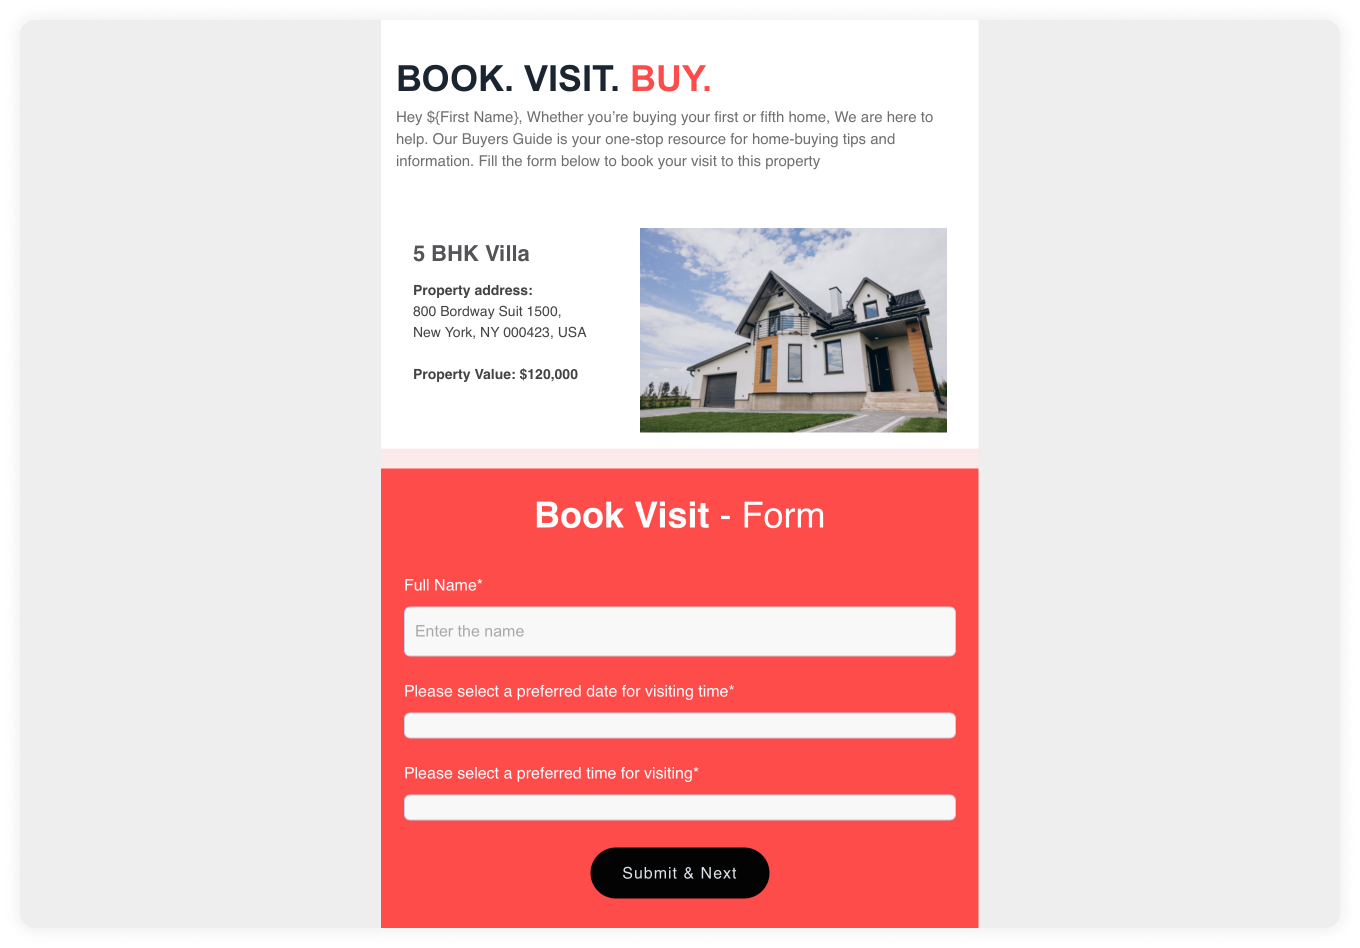 Real estate email design  example by Mailmodo